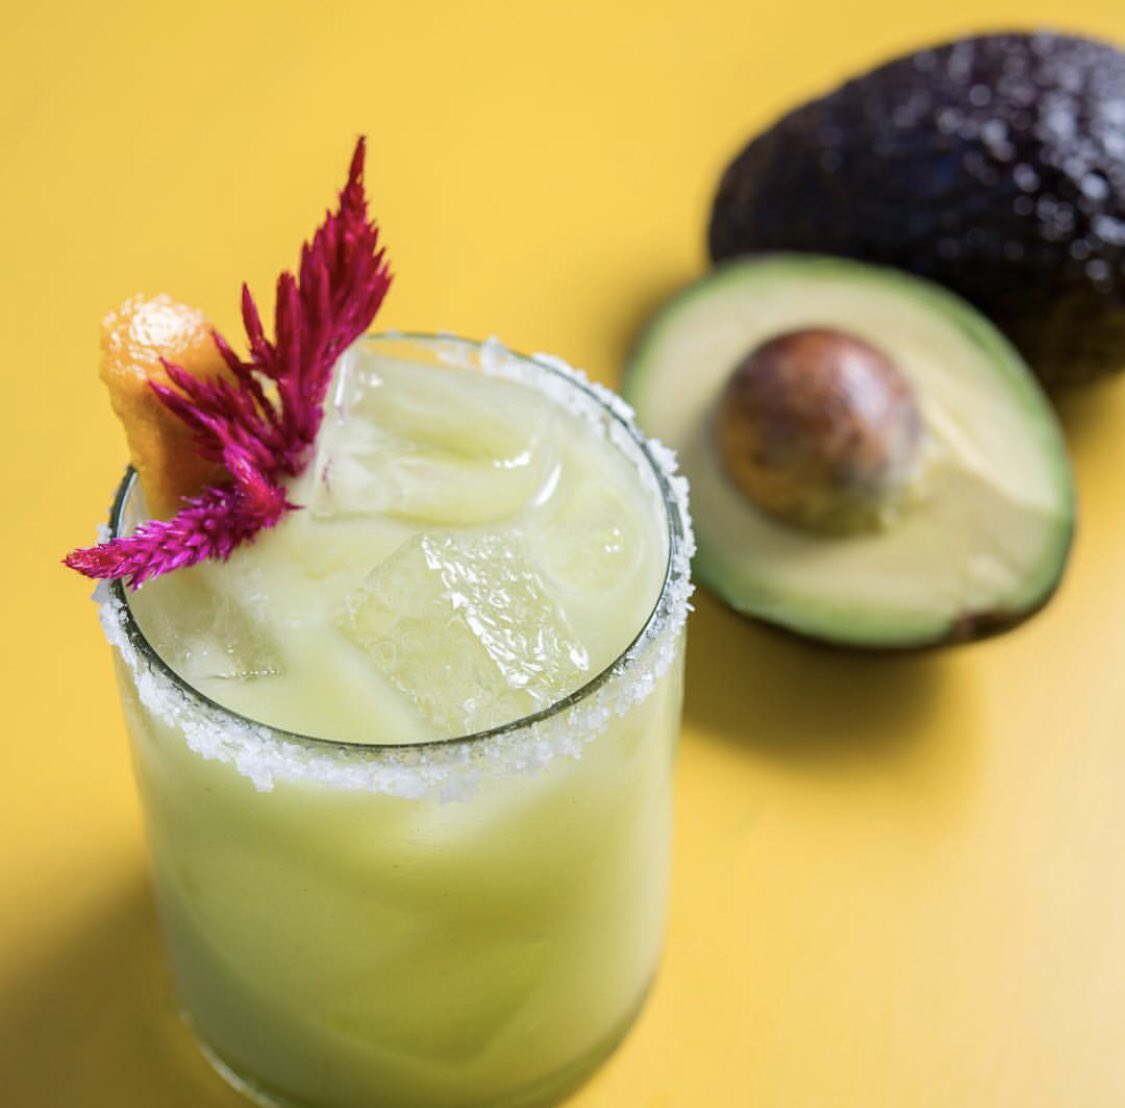 🥑 🎉 Let us introduce you to @EatPuesto ‘s margarita of the summer! This avocado margarita is now available at their #HQatSeaport location. Cheers amigos!

#visitseaport #eatpuesto